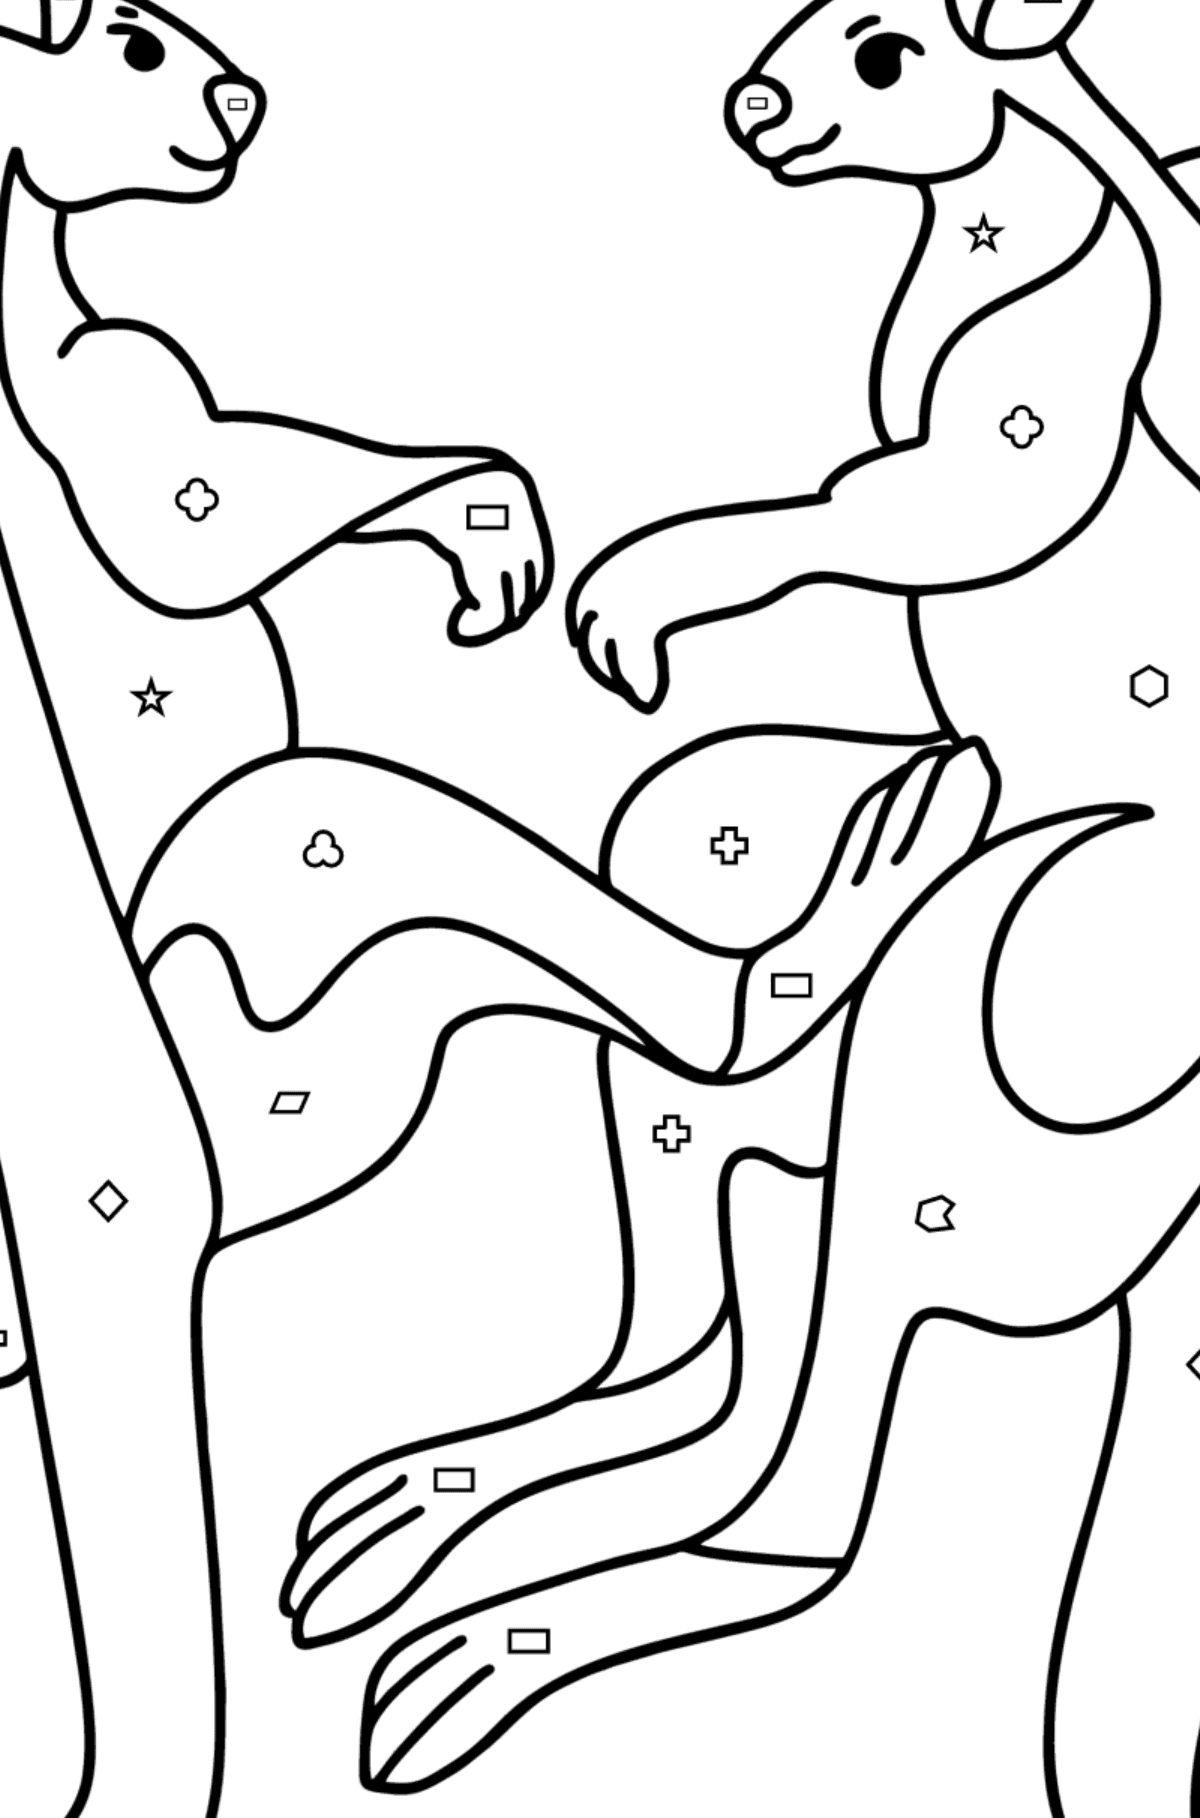 Kangaroo Wrestling coloring page - Coloring by Geometric Shapes for Kids